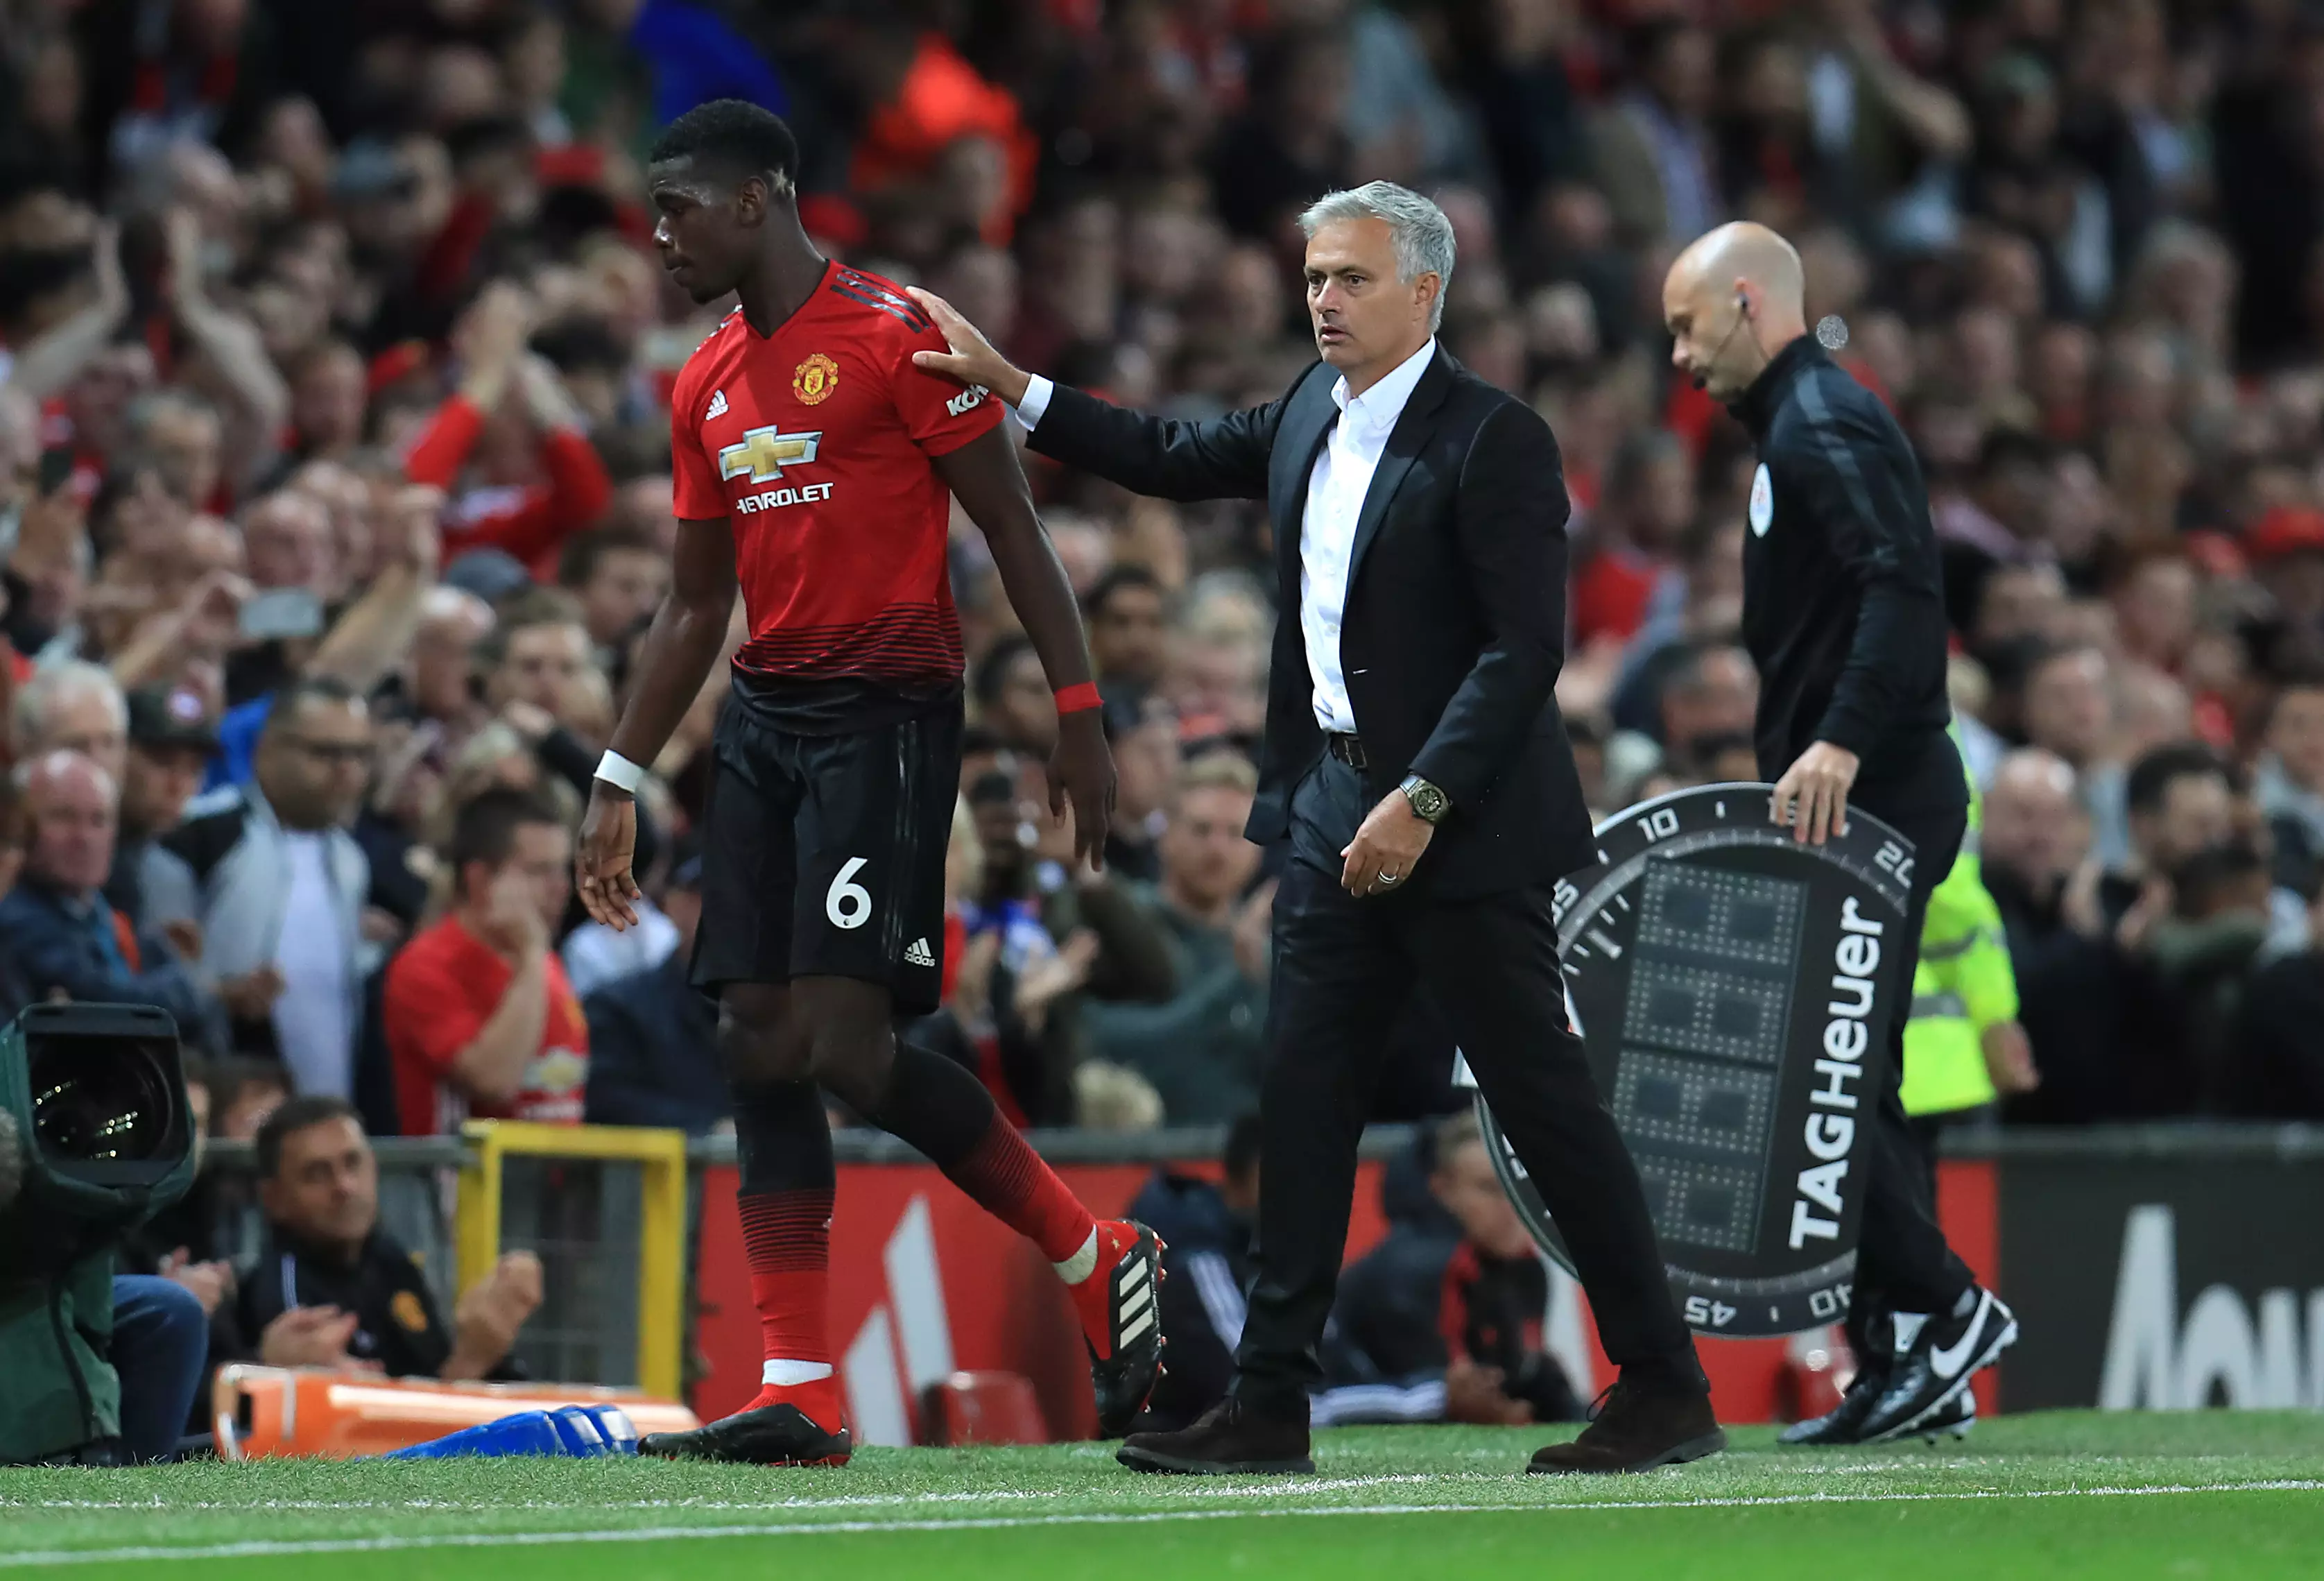 Pogba captained United last week and came off as a late substitute. Image: PA Images